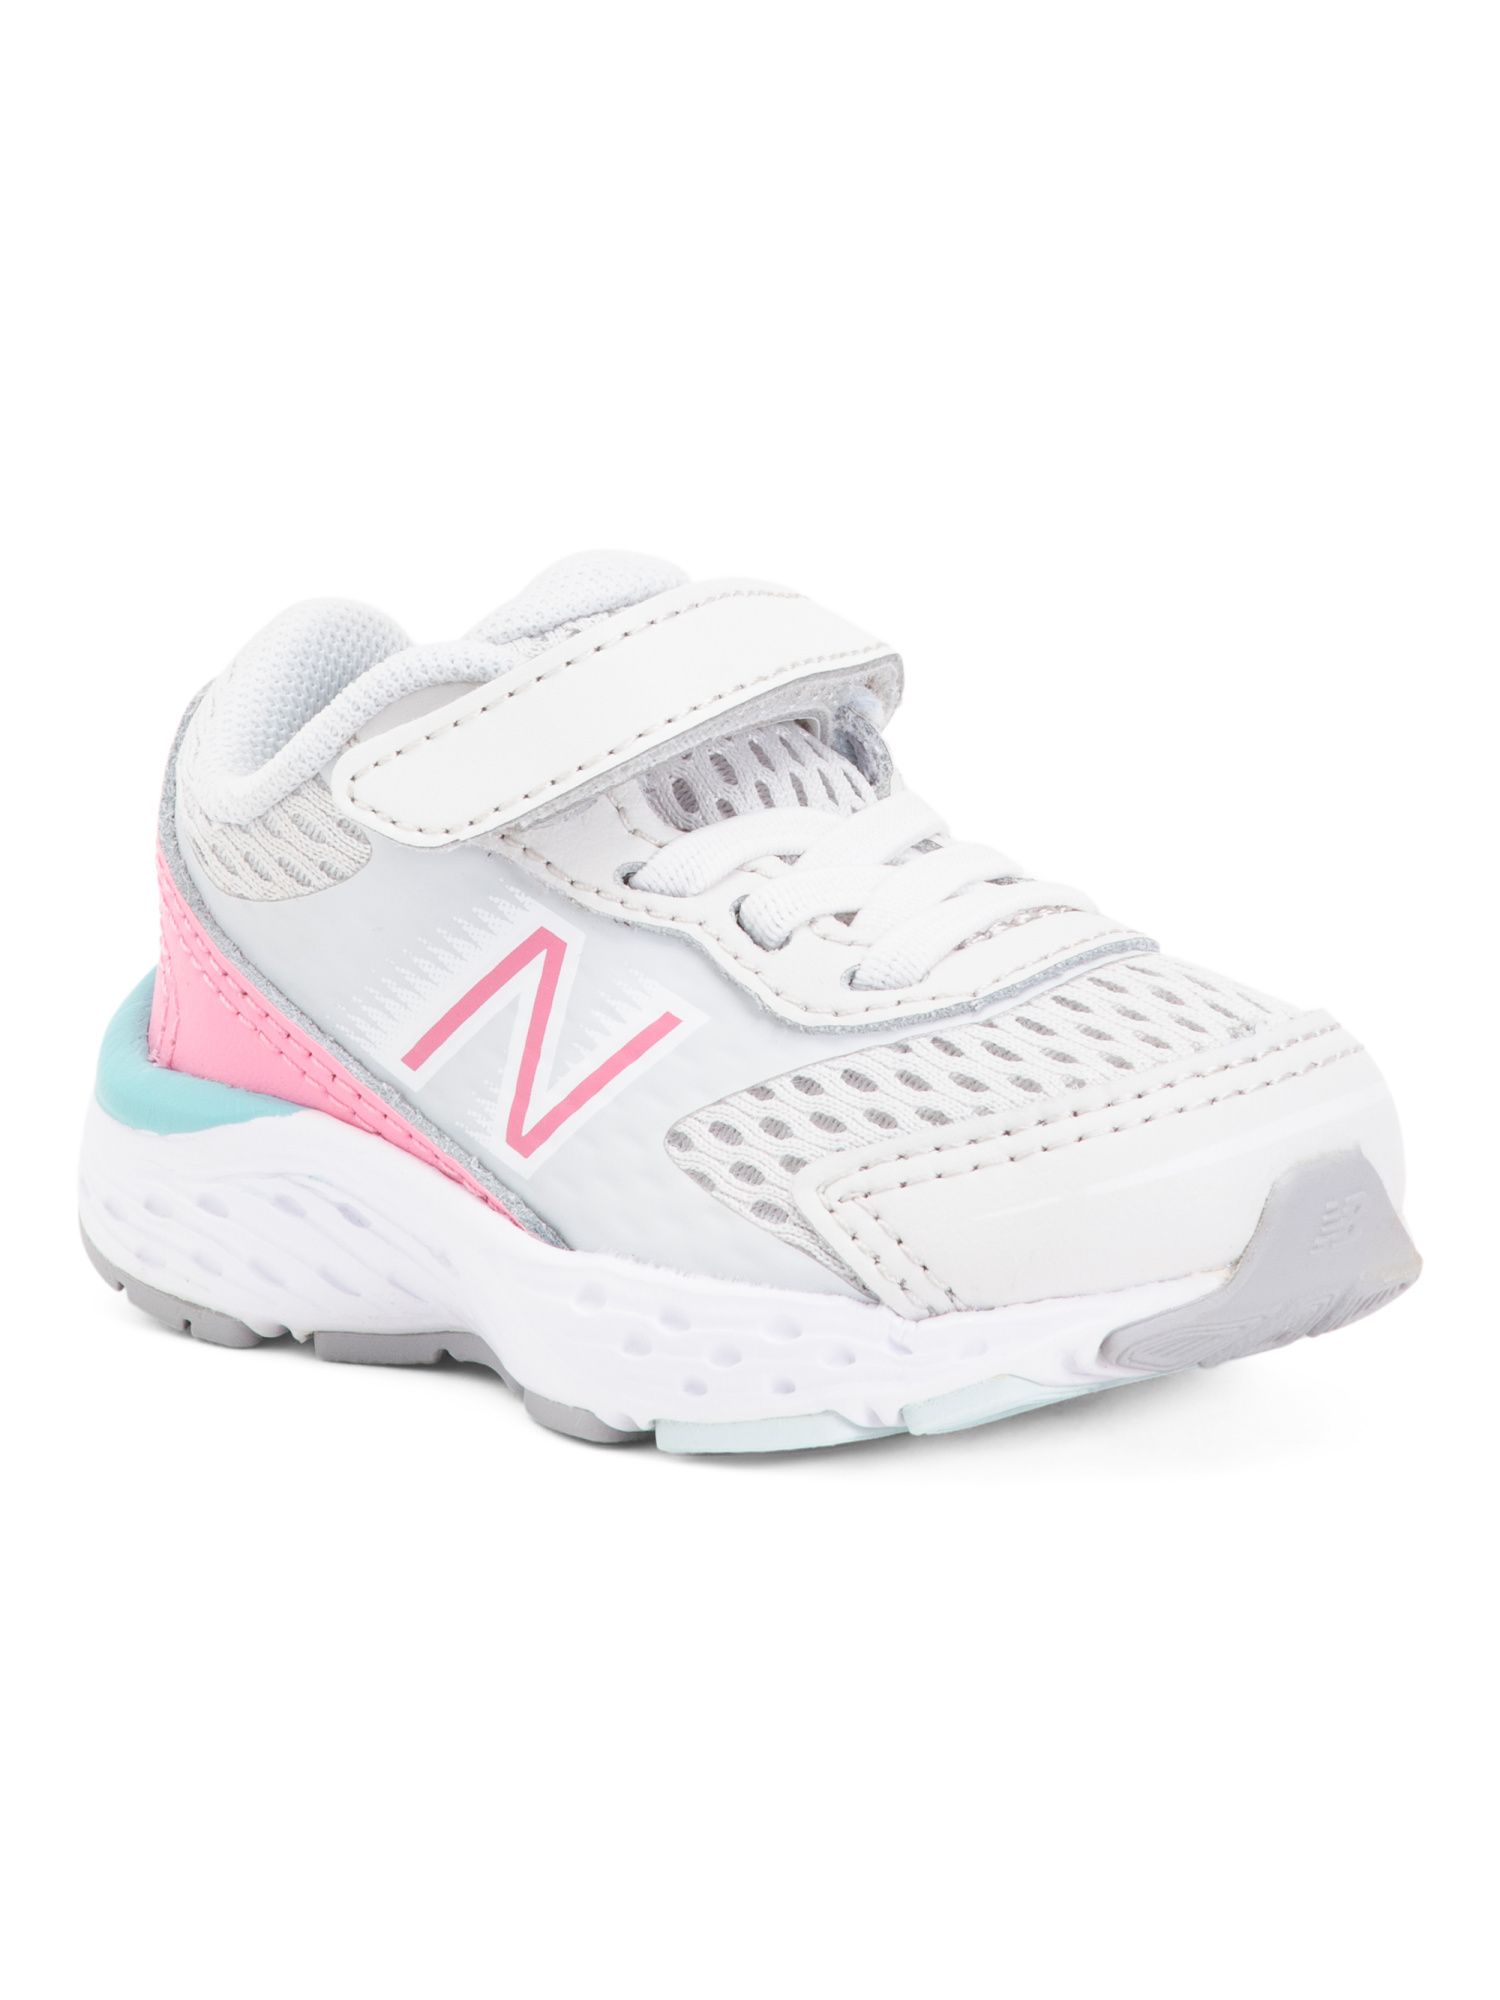 Performance Sneakers (infant, Toddler) | Kids' Athletic Sneakers | Marshalls | Marshalls